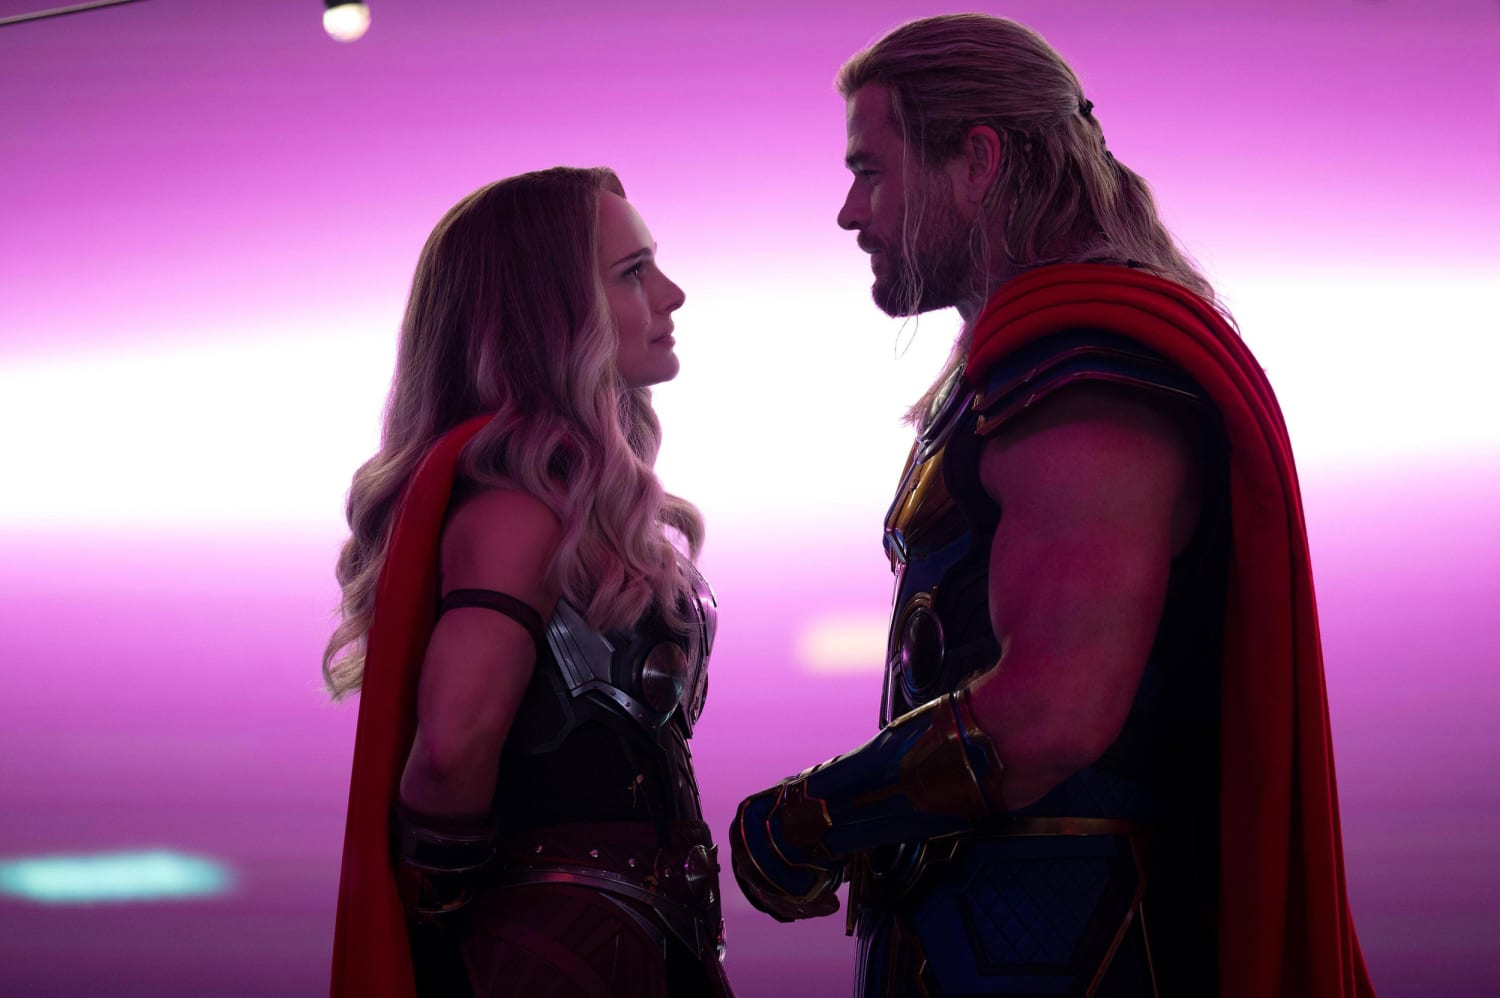 Thor: Love & Thunder scene before and After CGI : r/marvelstudios